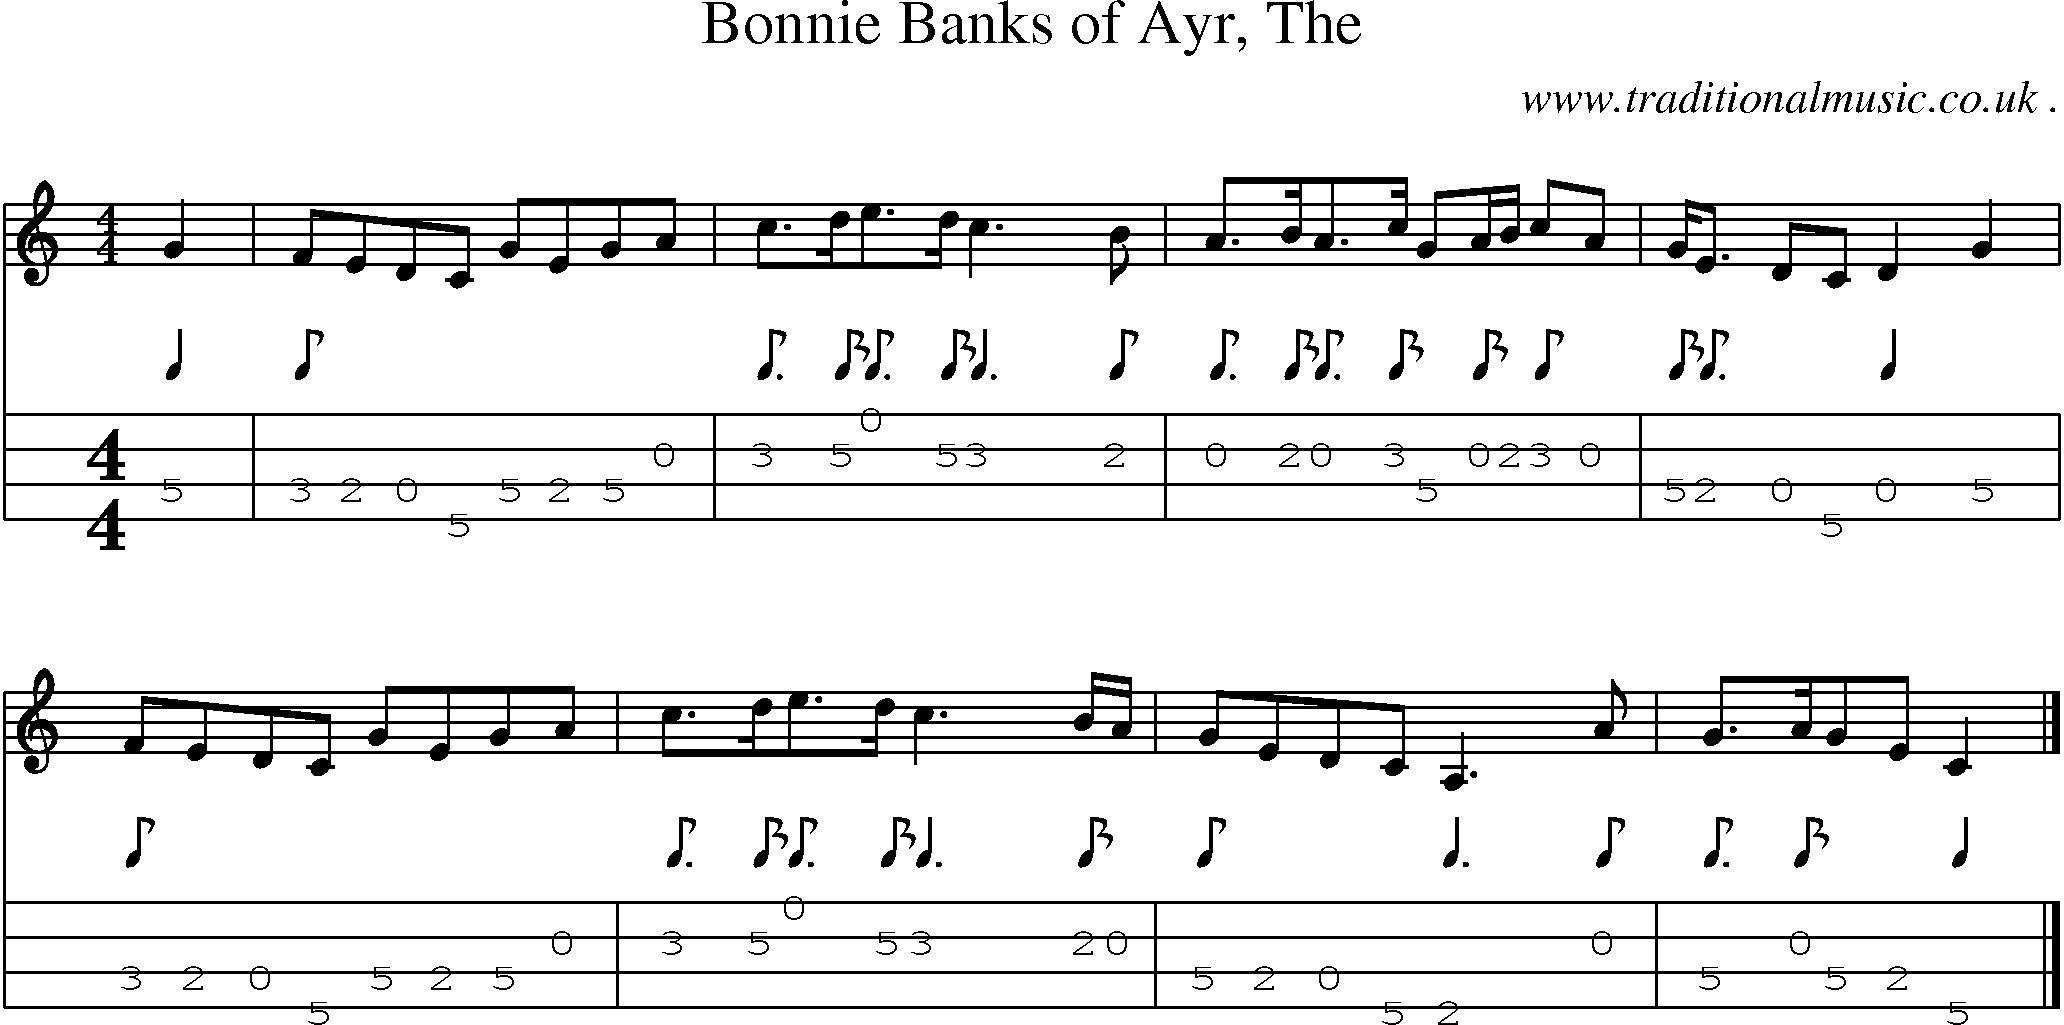 Sheet-music  score, Chords and Mandolin Tabs for Bonnie Banks Of Ayr The